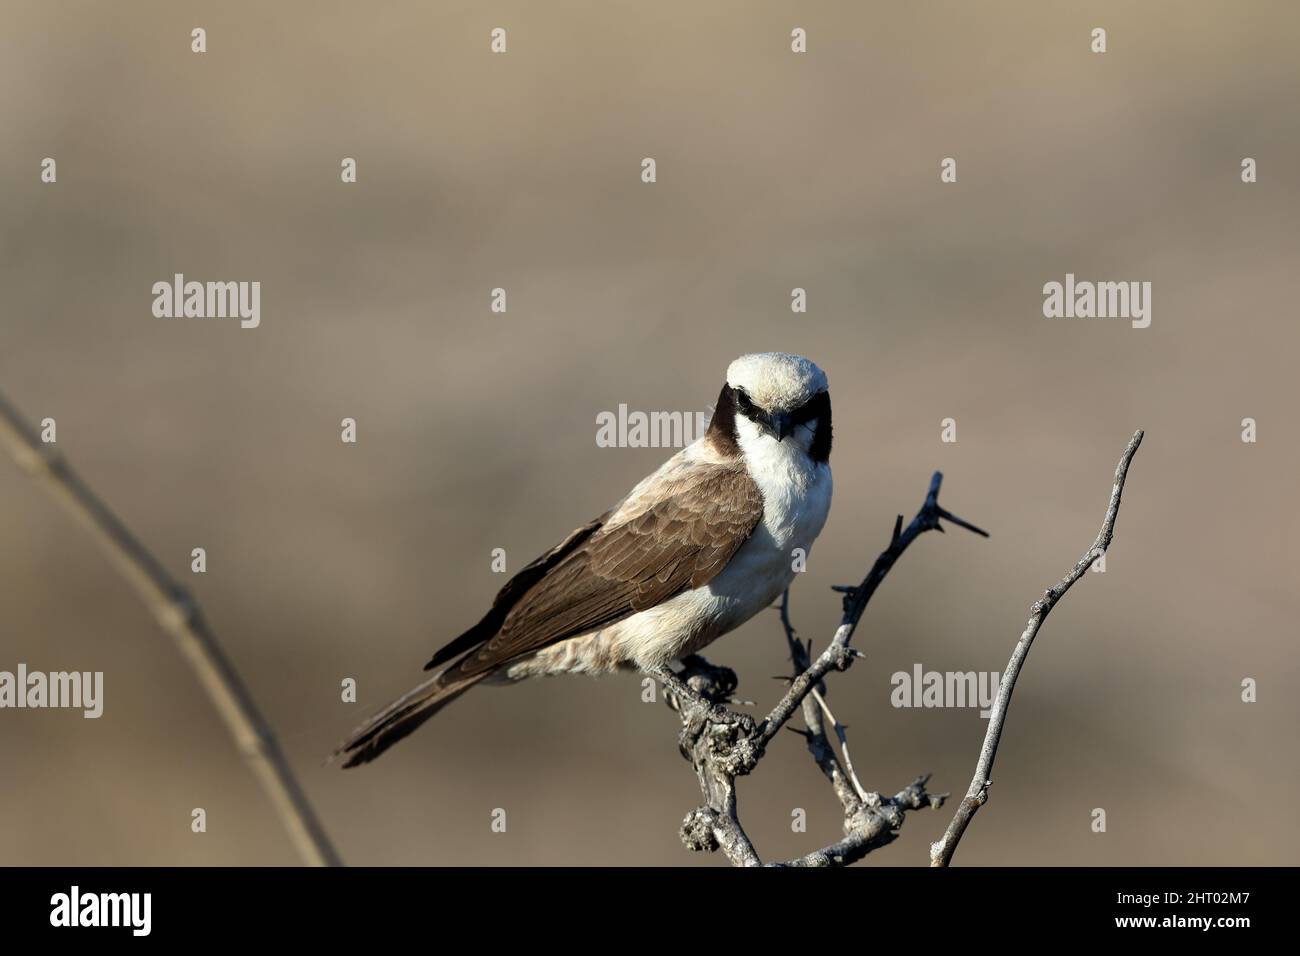 Closeup shot of a Southern White-crowned Shrike sitting on a branch Stock Photo